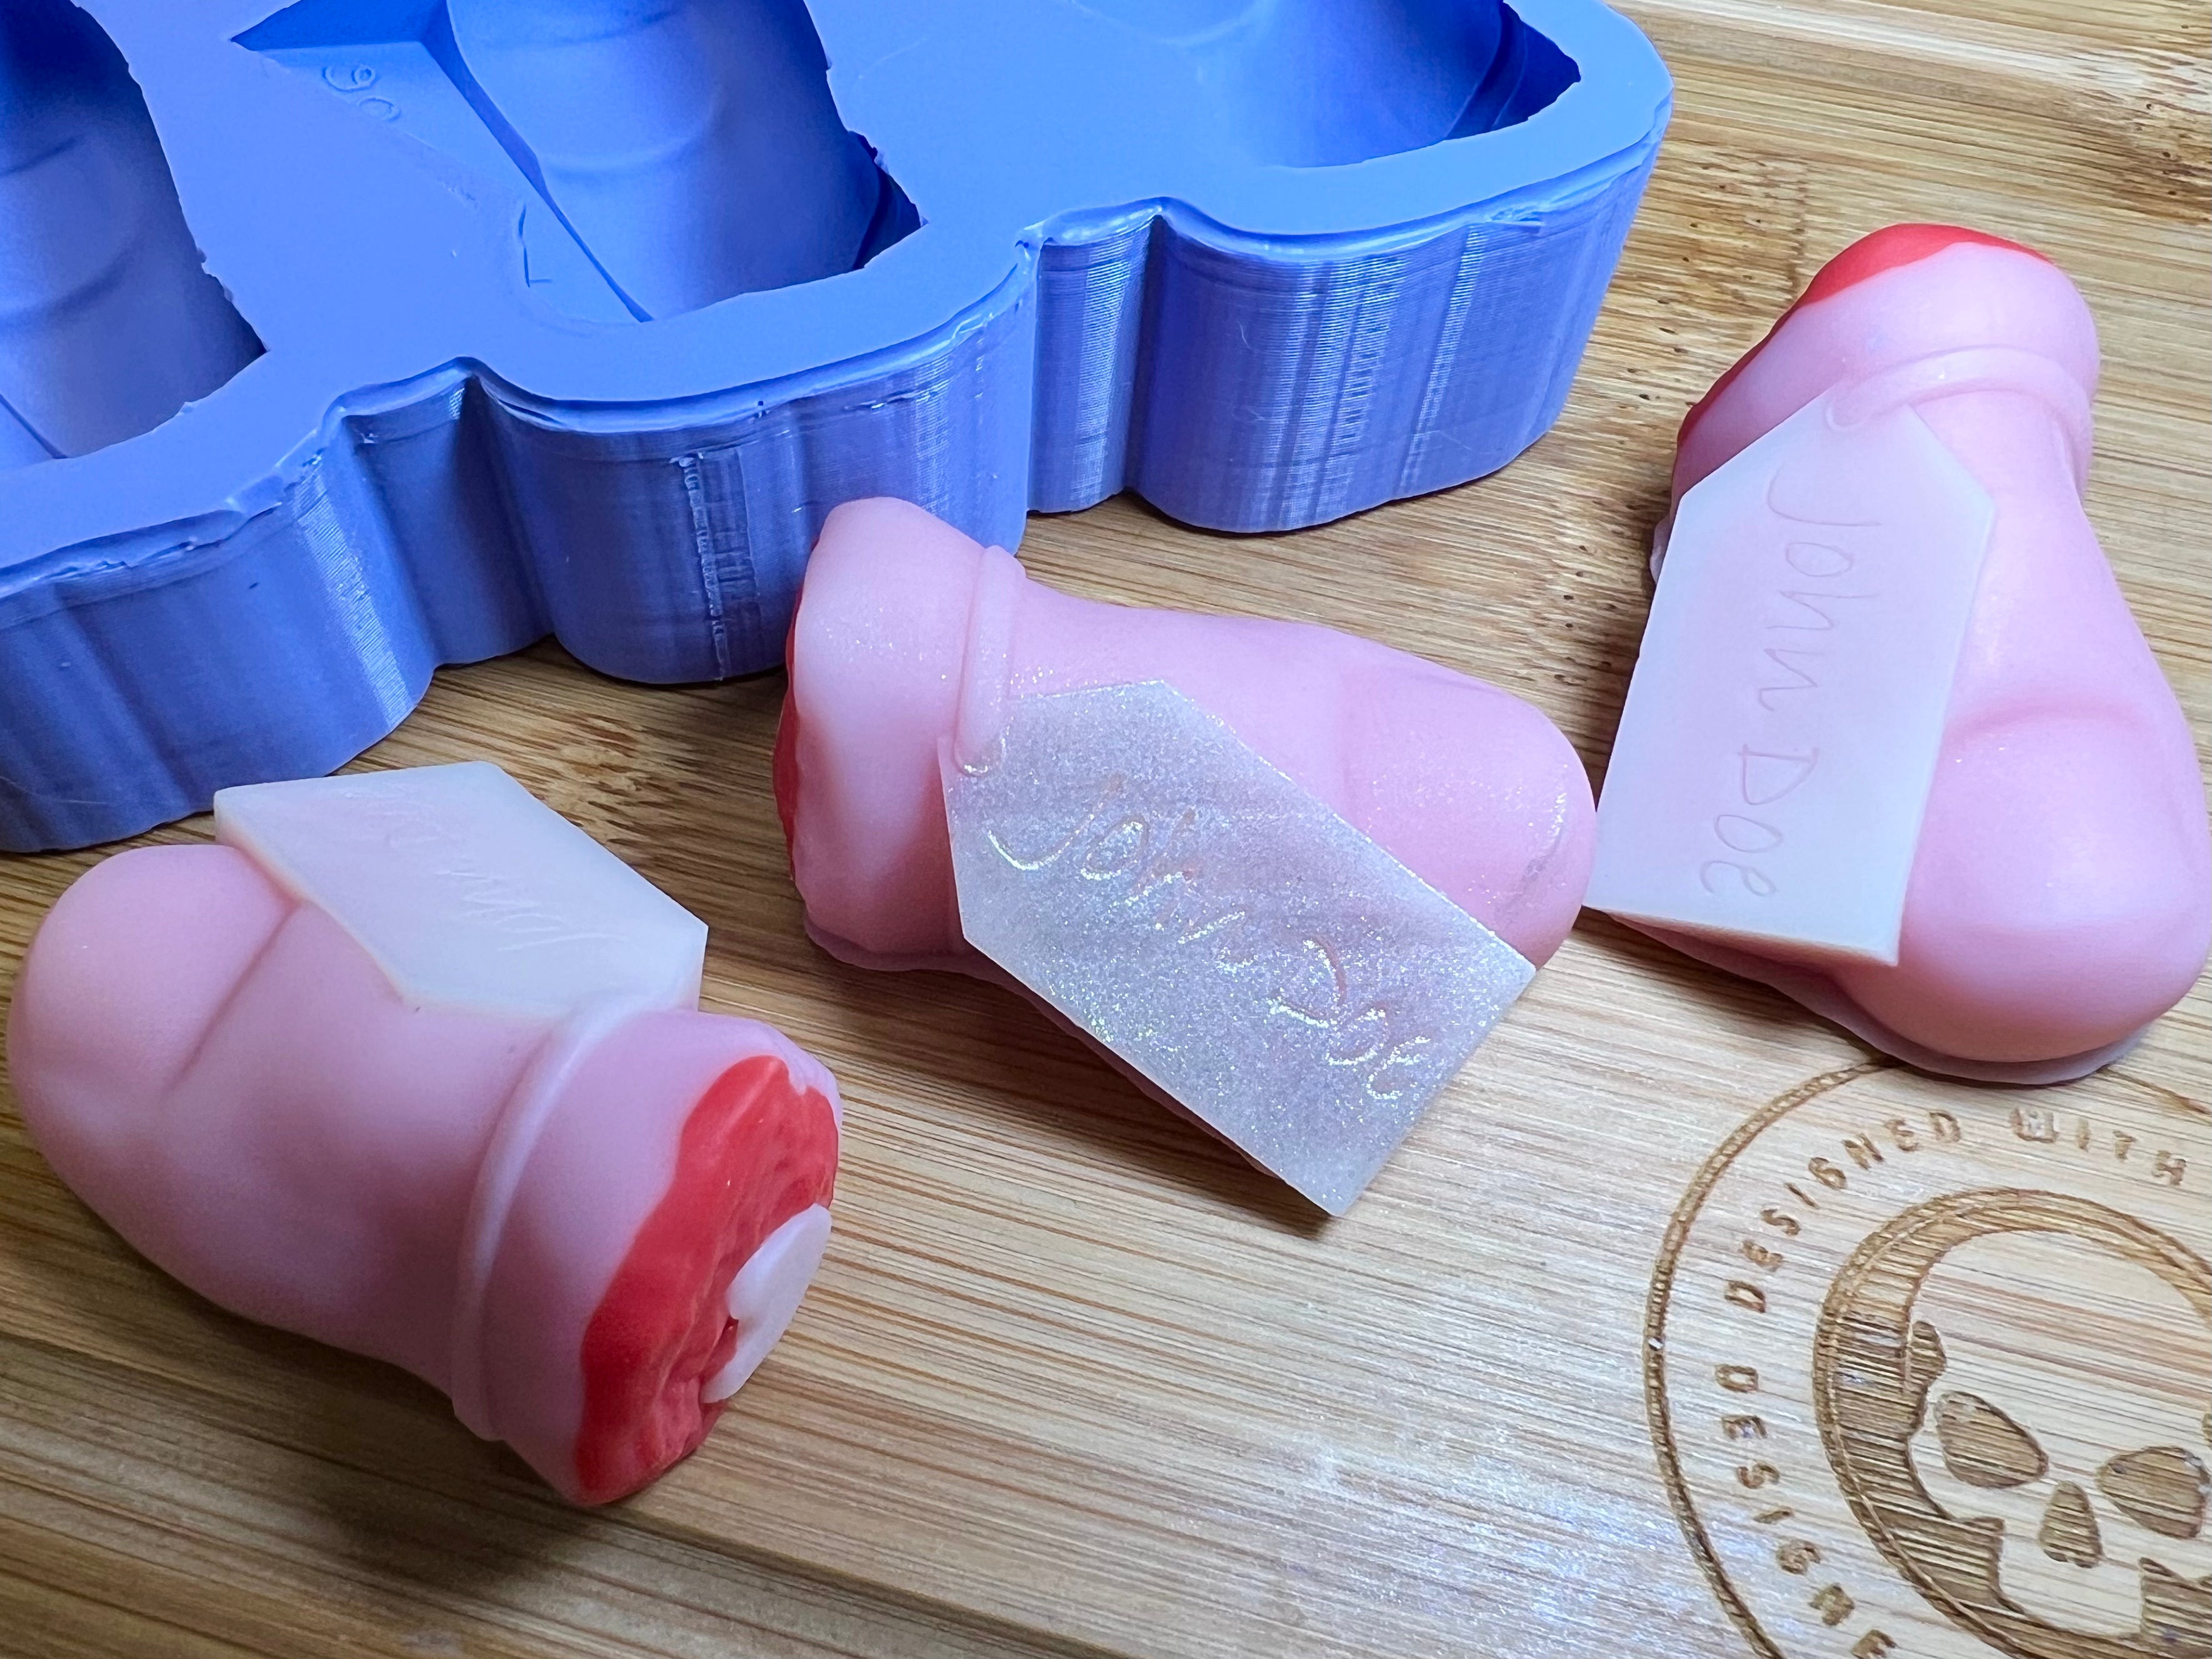 John Doe’s Toe Wax Melt Silicone Mold - Designed with a Twist - Top quality silicone molds made in the UK.